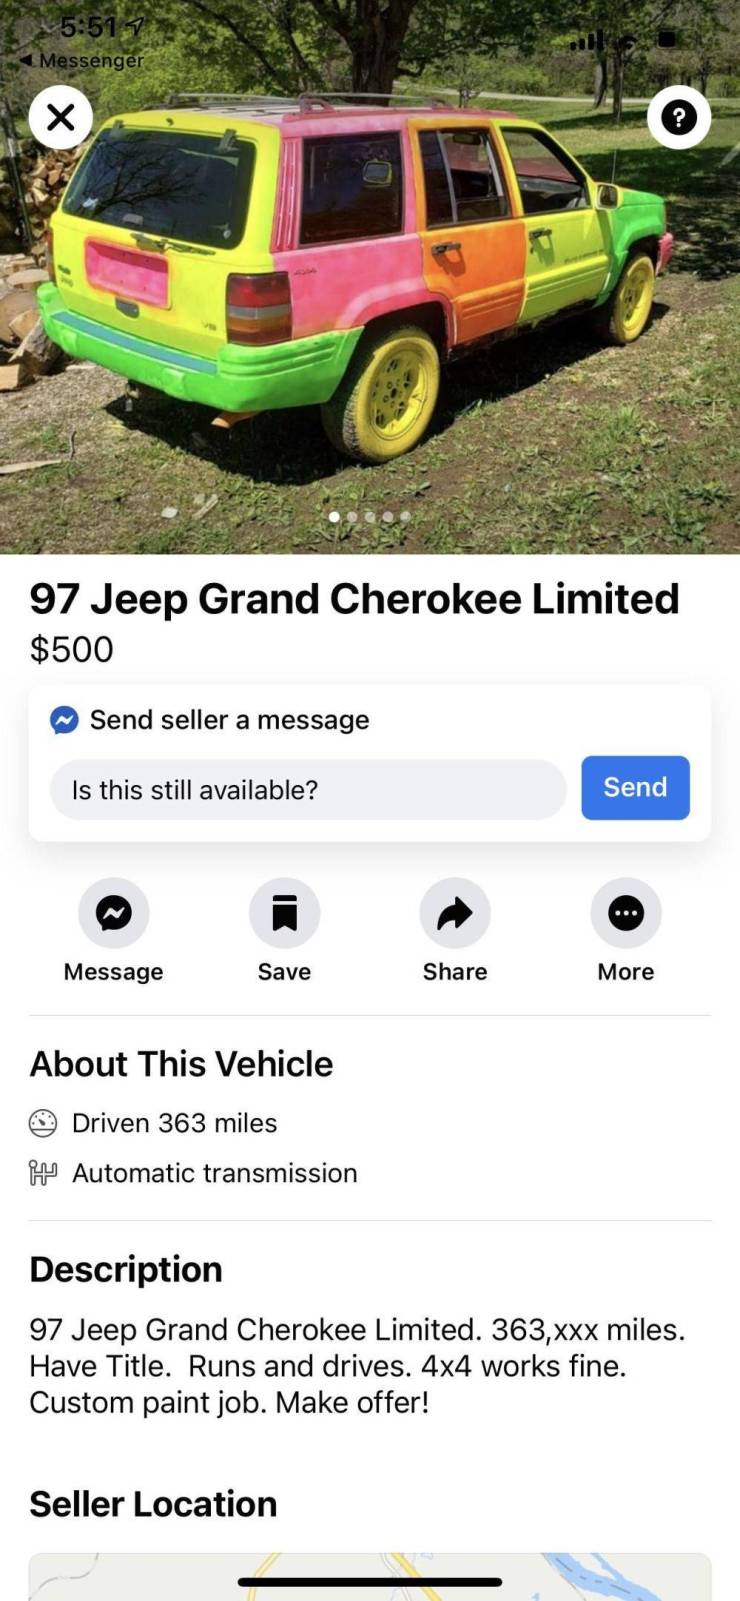 97 jeep grand cherokee limited for sale online with crazy neon paint job